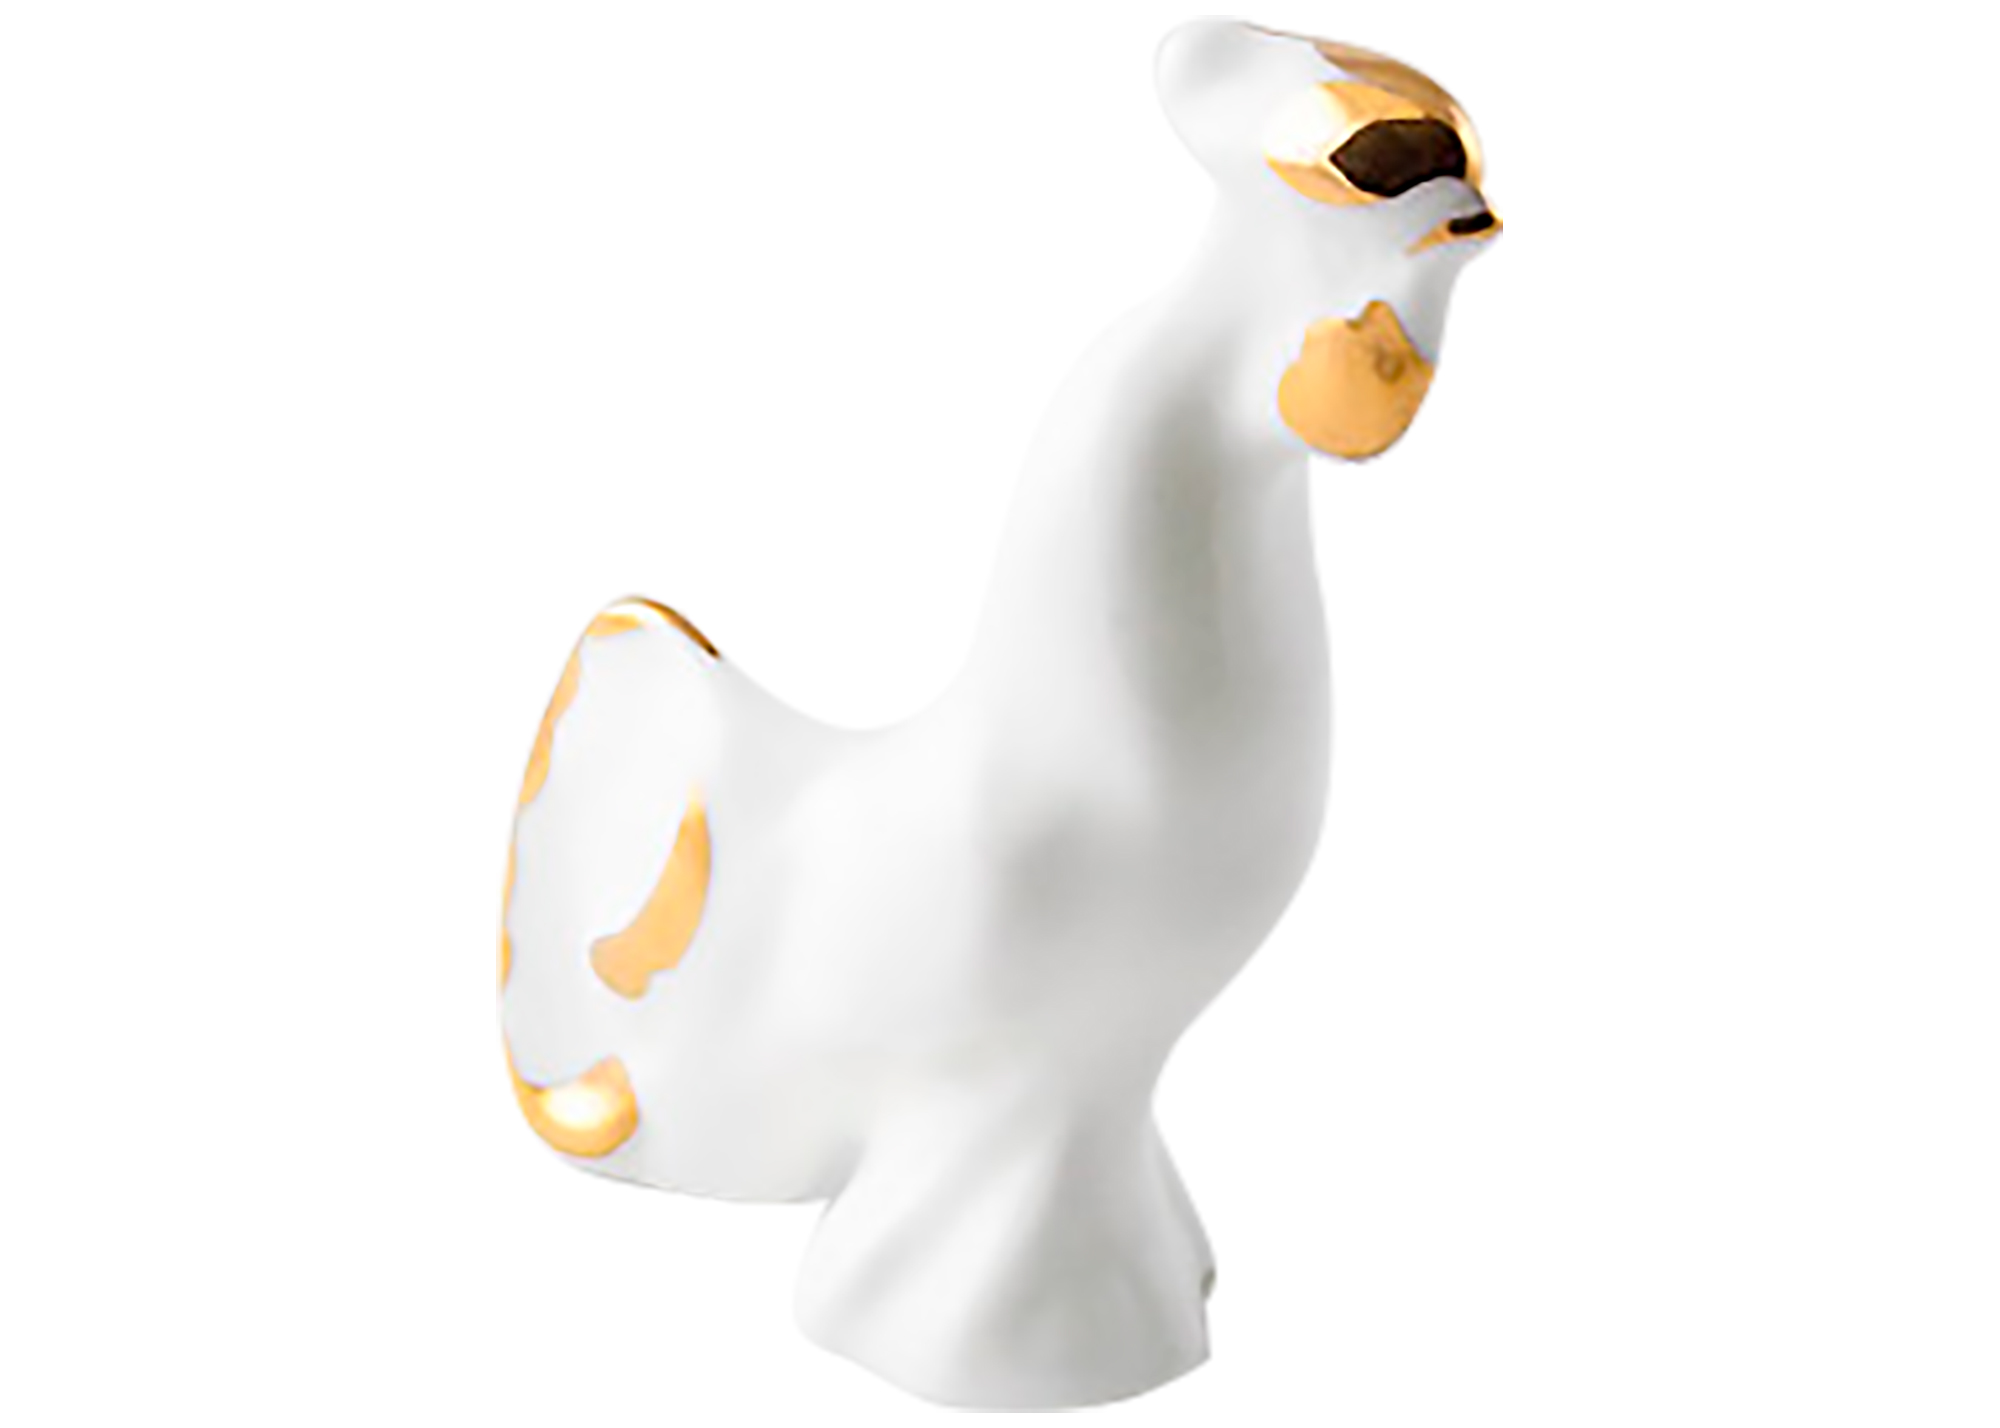 Buy Chinese Rooster Zodiac Gift at GoldenCockerel.com